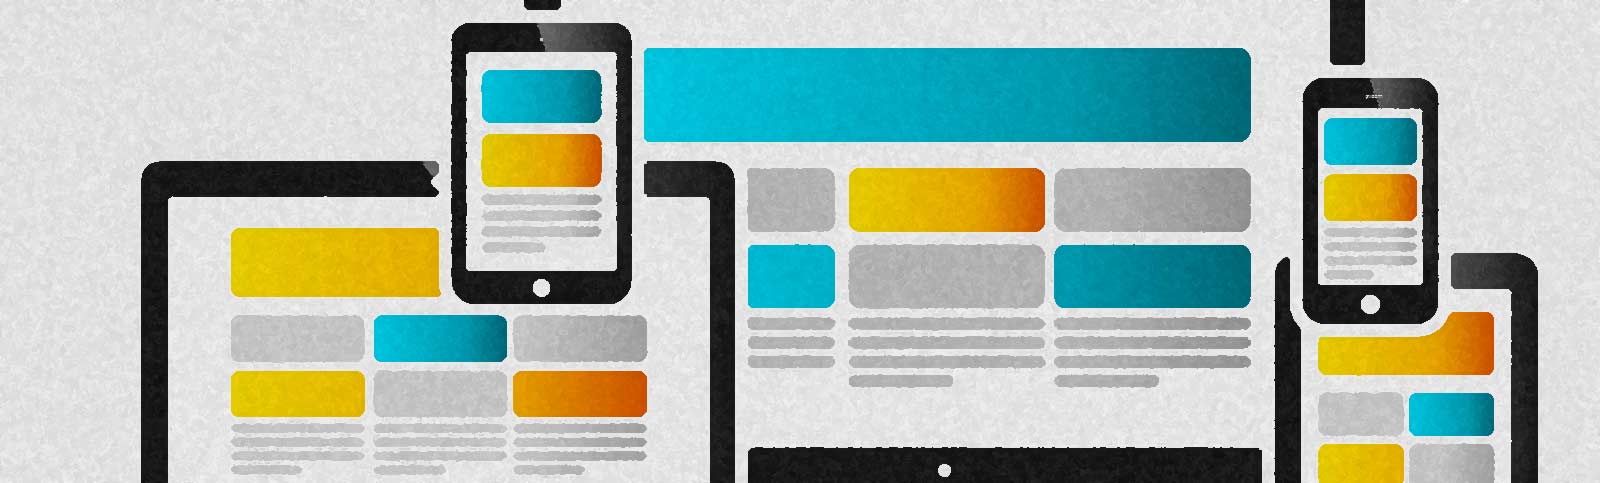 Responsive Web Design Tips that Keep Your Website Up-to-date